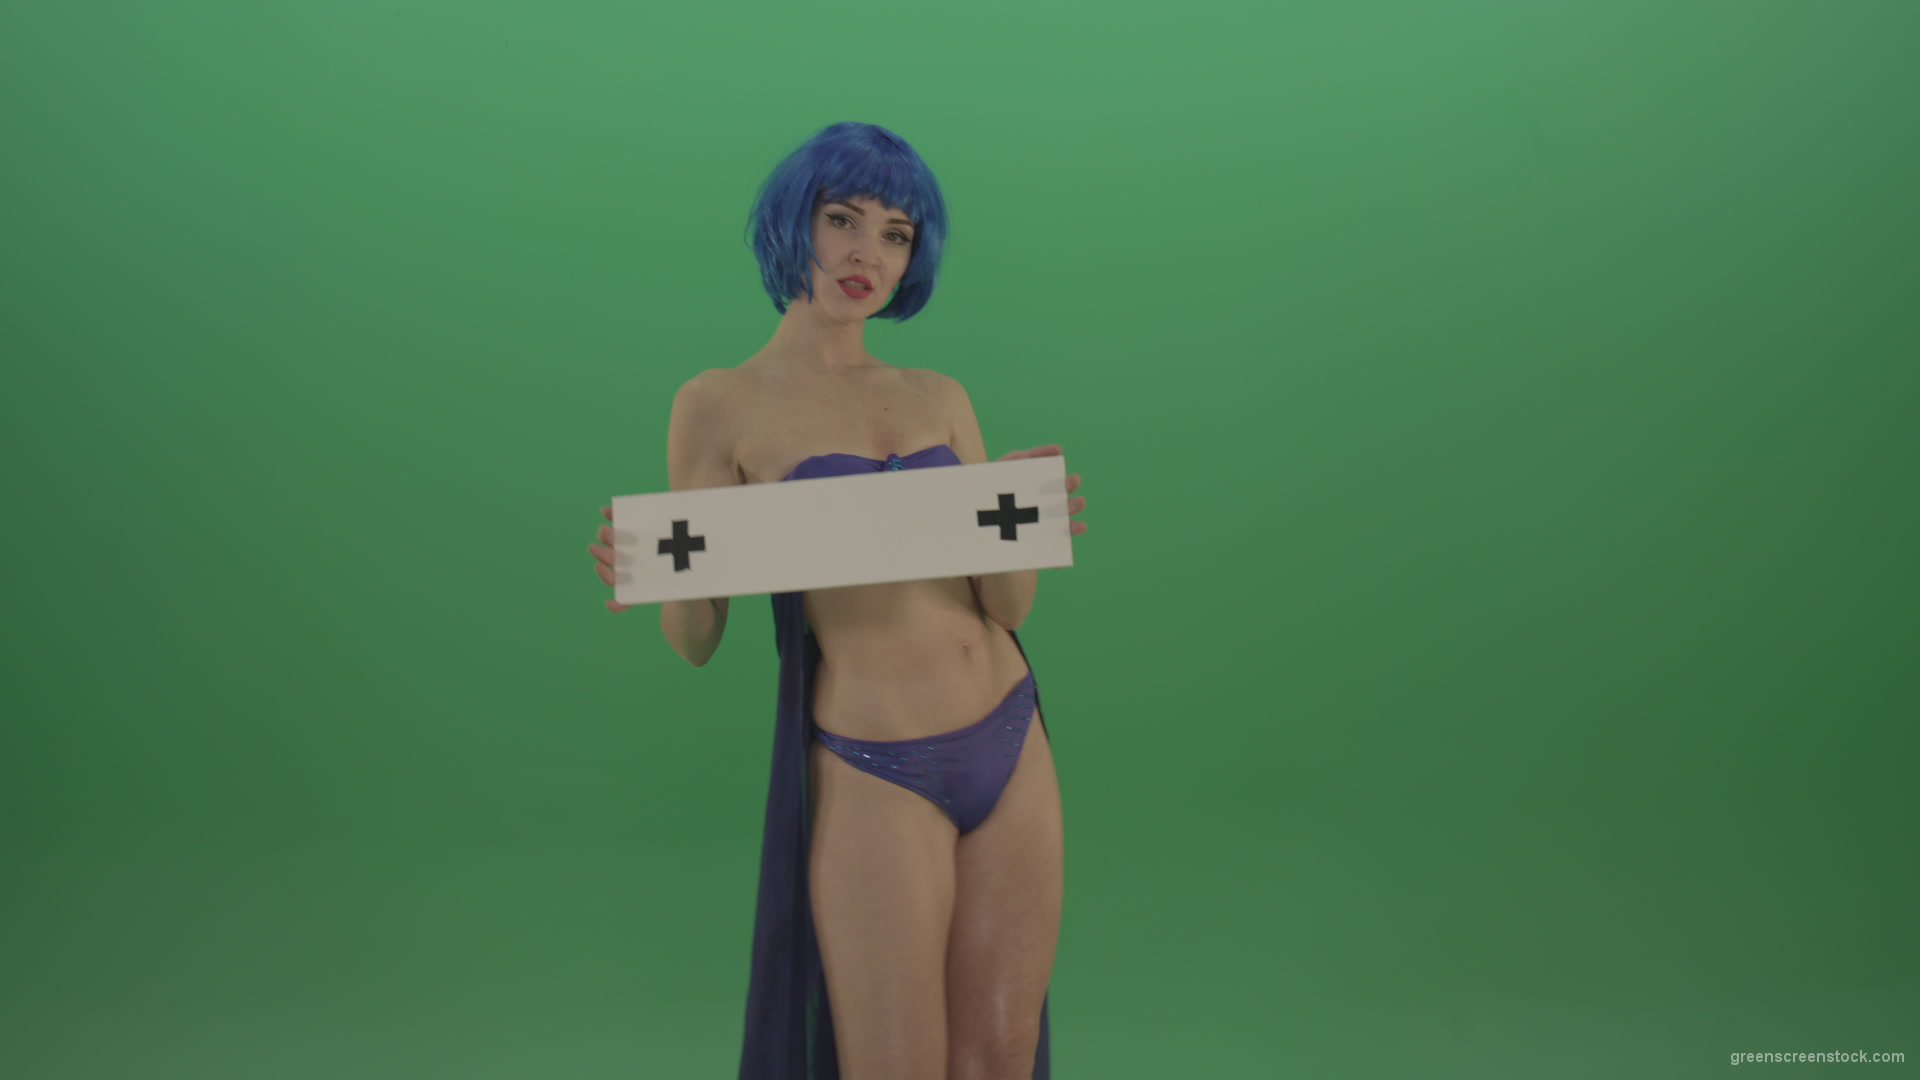 Blue-hair-elegant-naked-girl-posing-with-text-mockup-template-plane-on-green-screen_006 Green Screen Stock